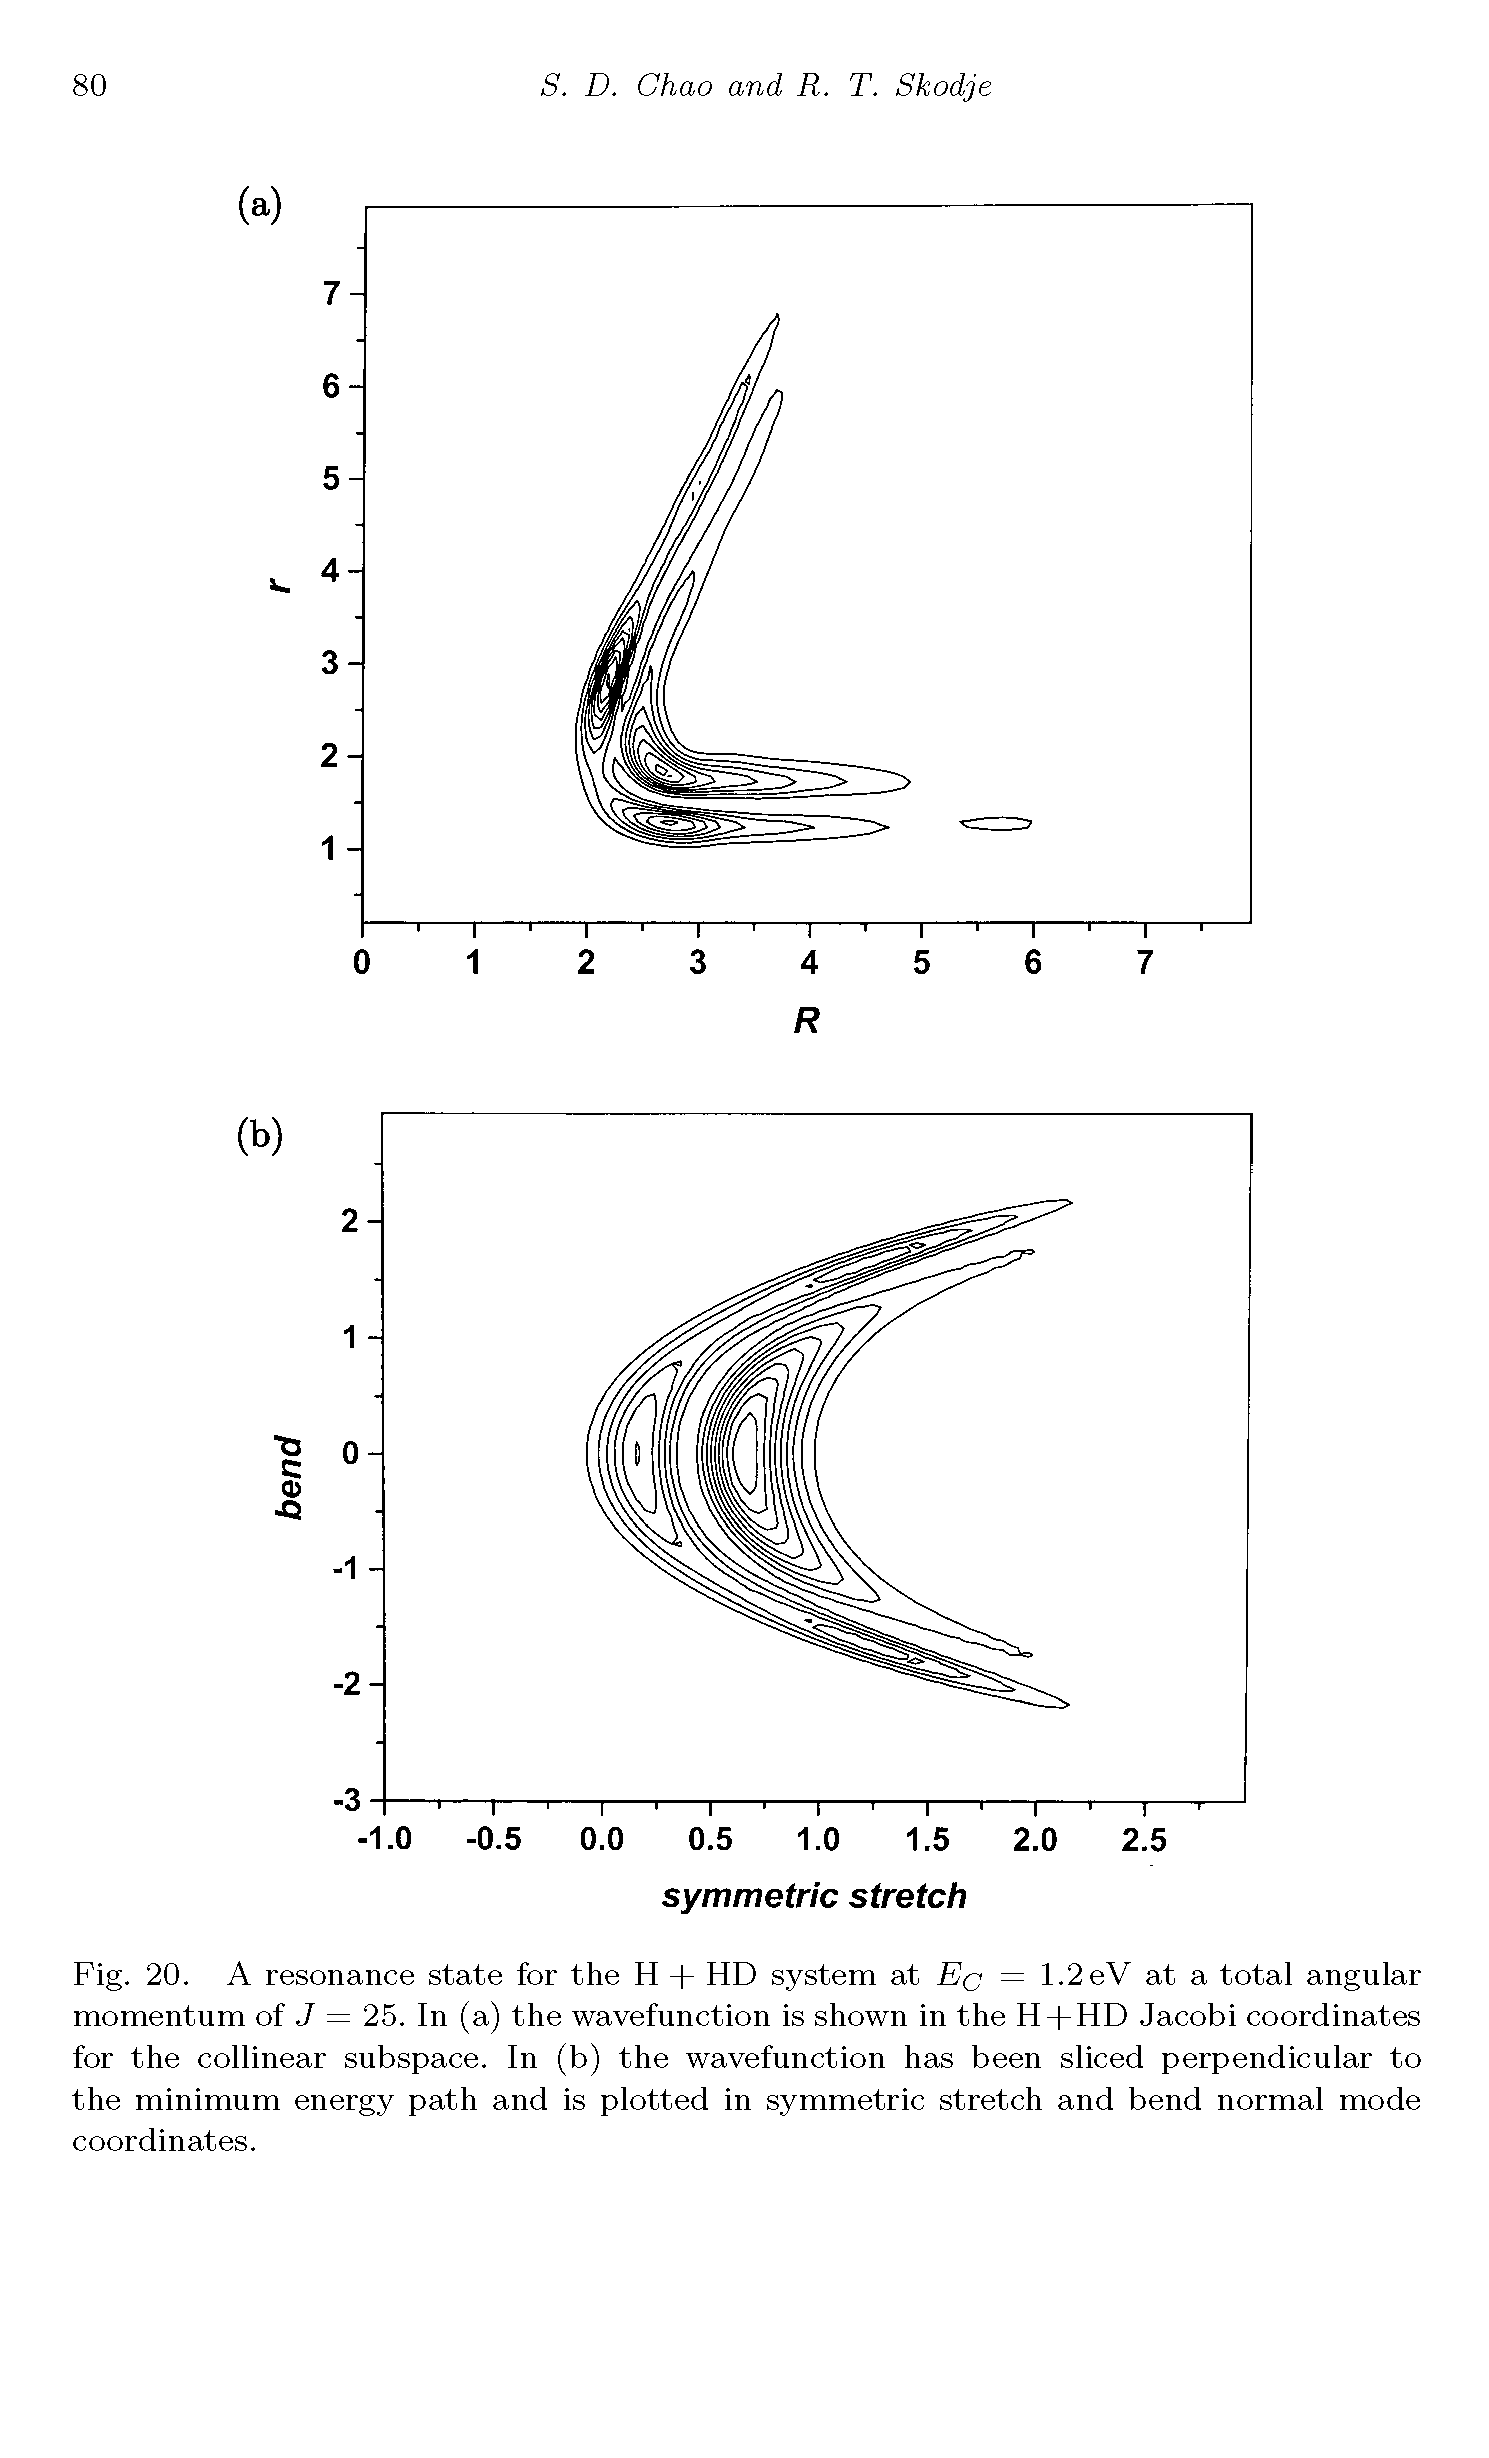 Fig. 20. A resonance state for the H + HD system at Ec = 1.2 eV at a total angular momentum of J = 25. In (a) the wavefunction is shown in the H + HD Jacobi coordinates for the collinear subspace. In (b) the wavefunction has been sliced perpendicular to the minimum energy path and is plotted in symmetric stretch and bend normal mode coordinates.